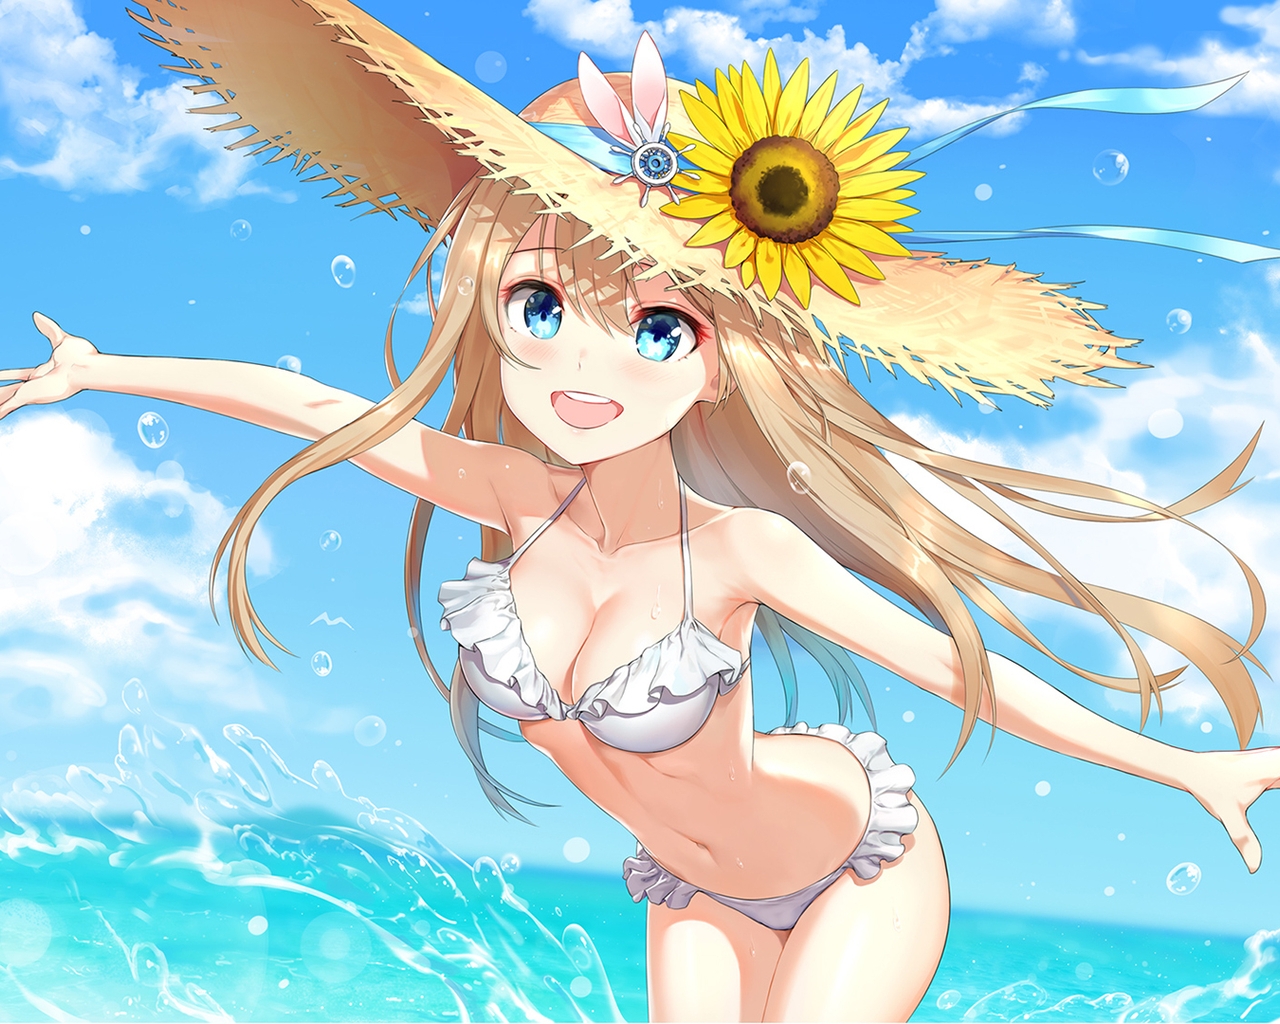 Image: Girl, blonde, blue eyes, swimsuit, hat, sunflower, drops, spray, water, sky, vacation